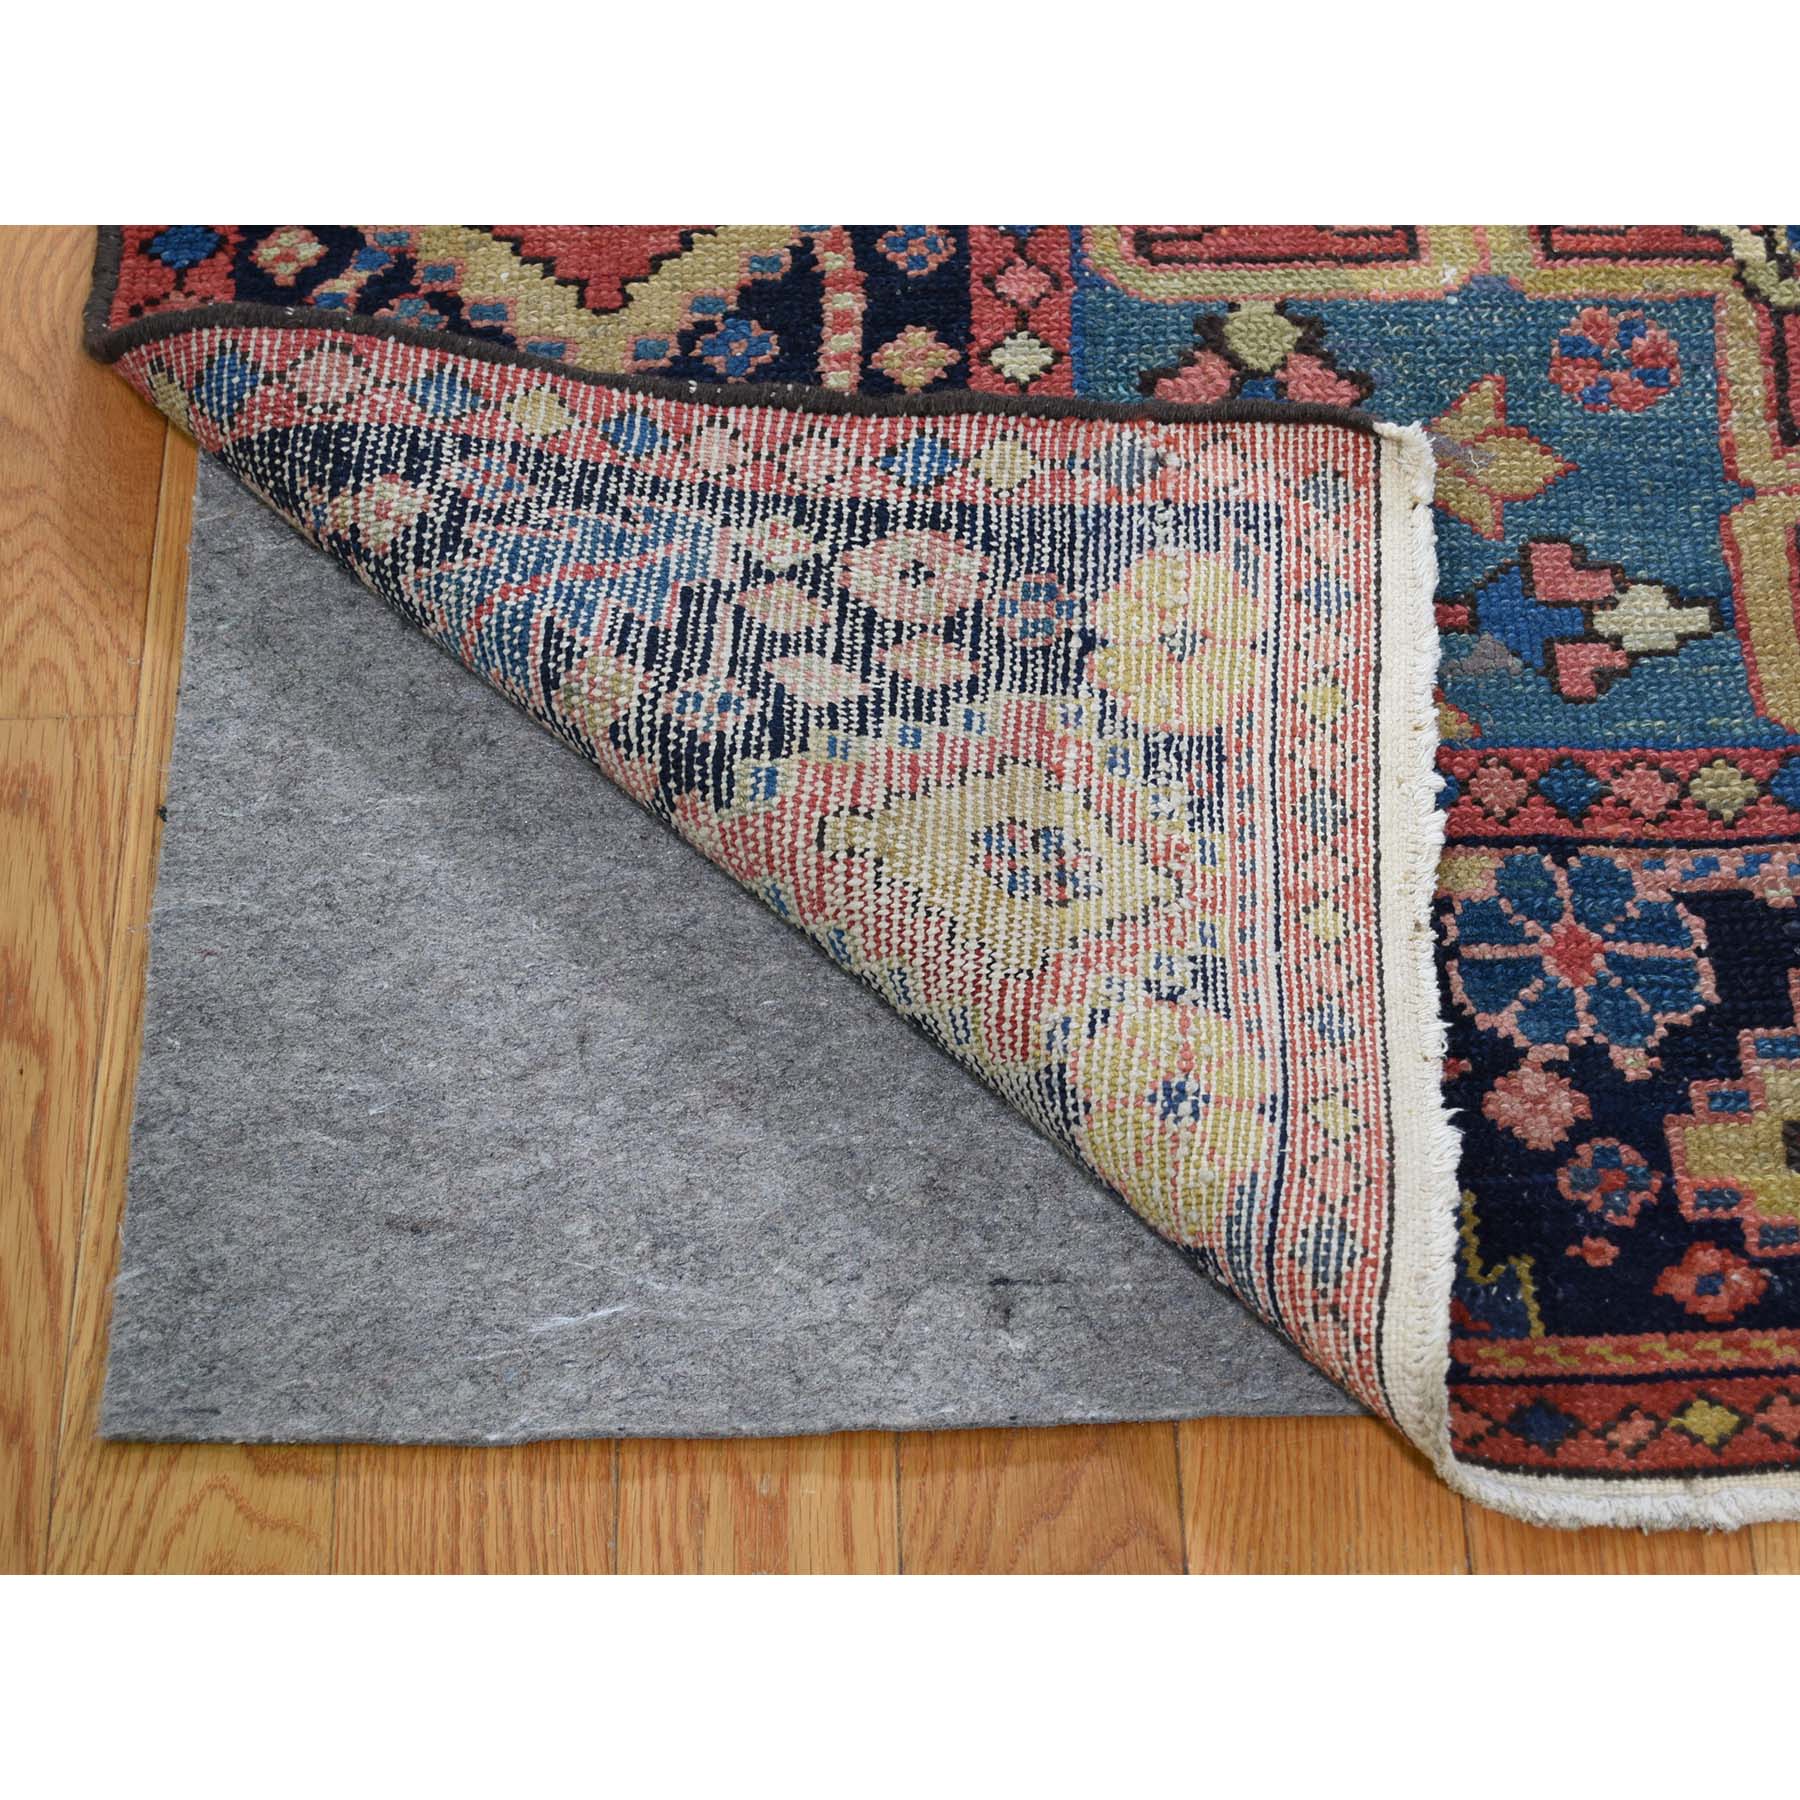 9-6 x13-4  Antique Persian Heriz Hand-Knotted Exc Condition Pure Wool Oriental Rug 